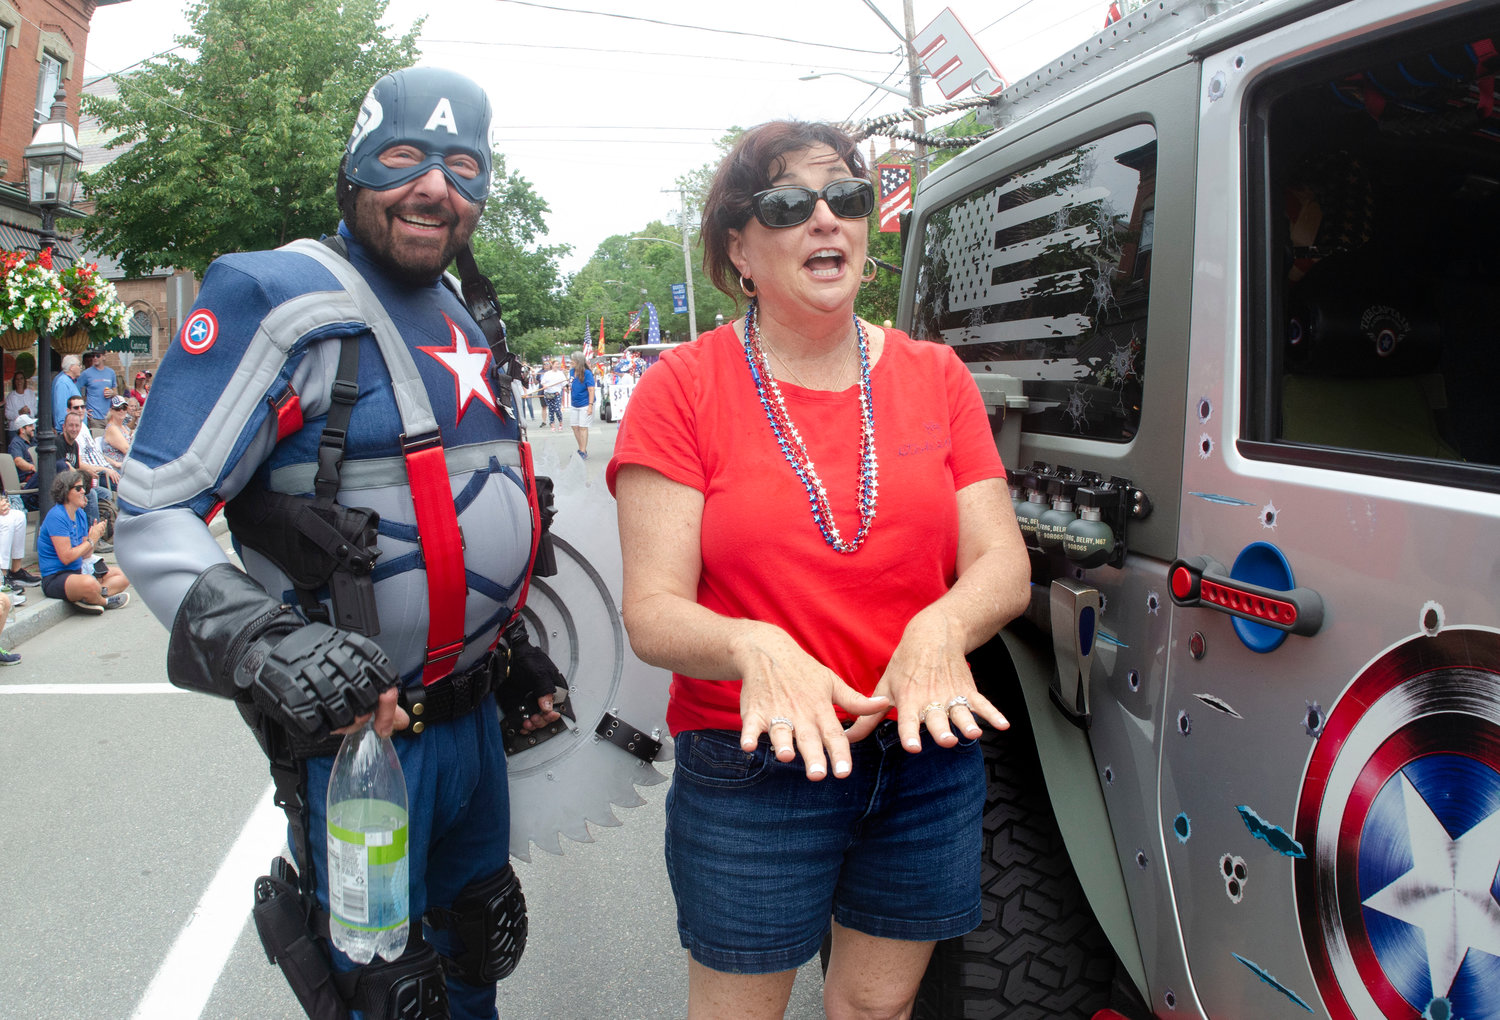 Captain America, Brian Solitro, stopped in downtown Bristol to propose to his girlfriend, Maura Turner. The newlyweds pause for a moment before a cheering crowd after she accepted his proposal.